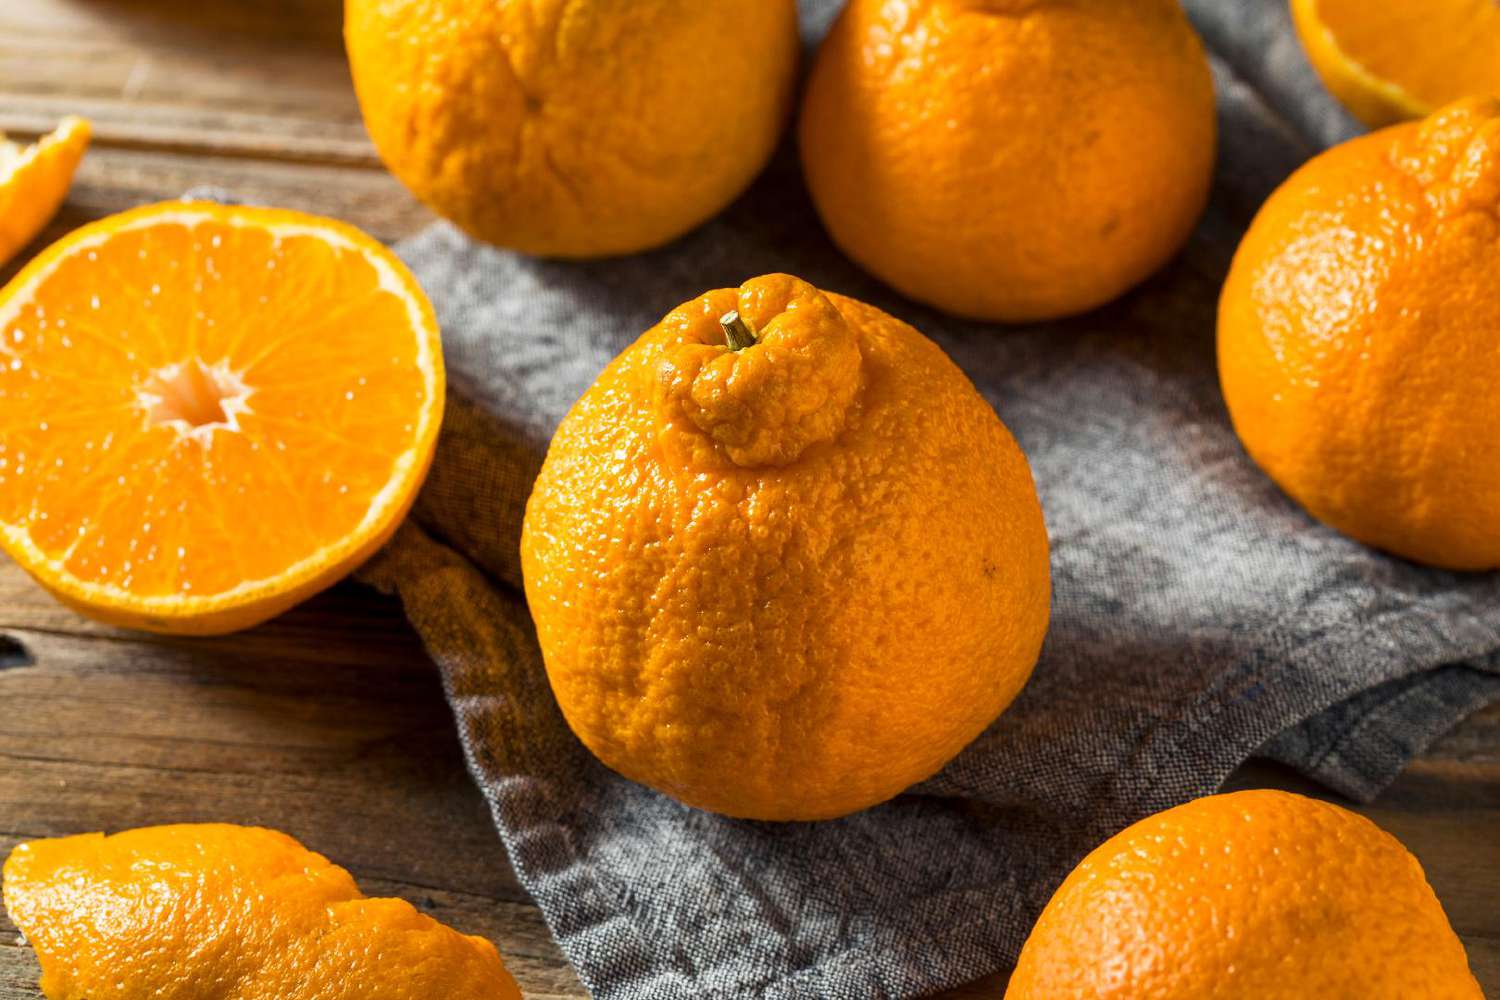 What is a Sumo Orange and How Do I Use It? | EatingWell